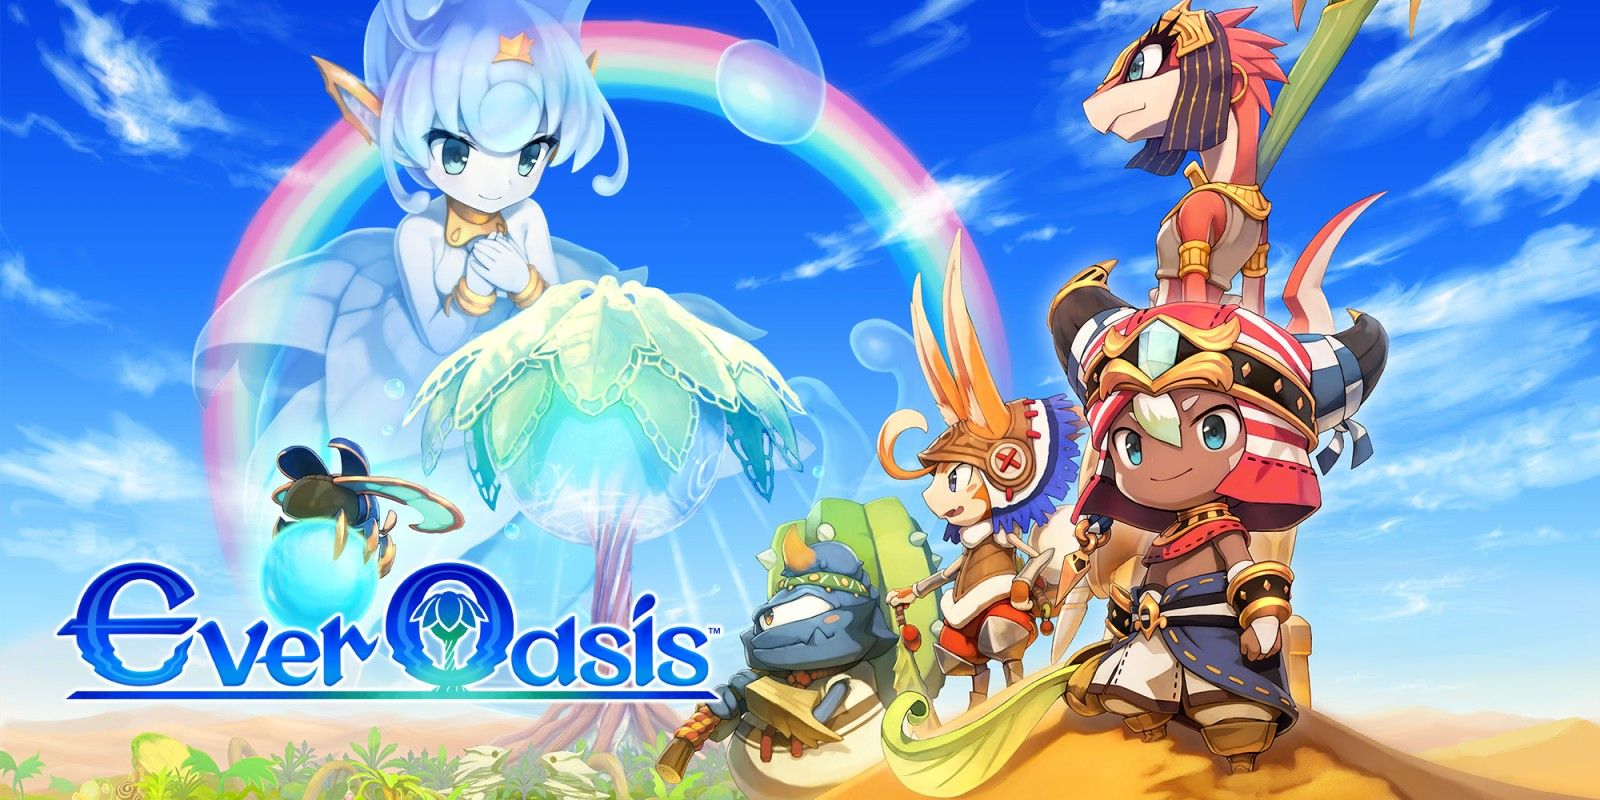 Ever Oasis is a little gem that blends genres beautifully